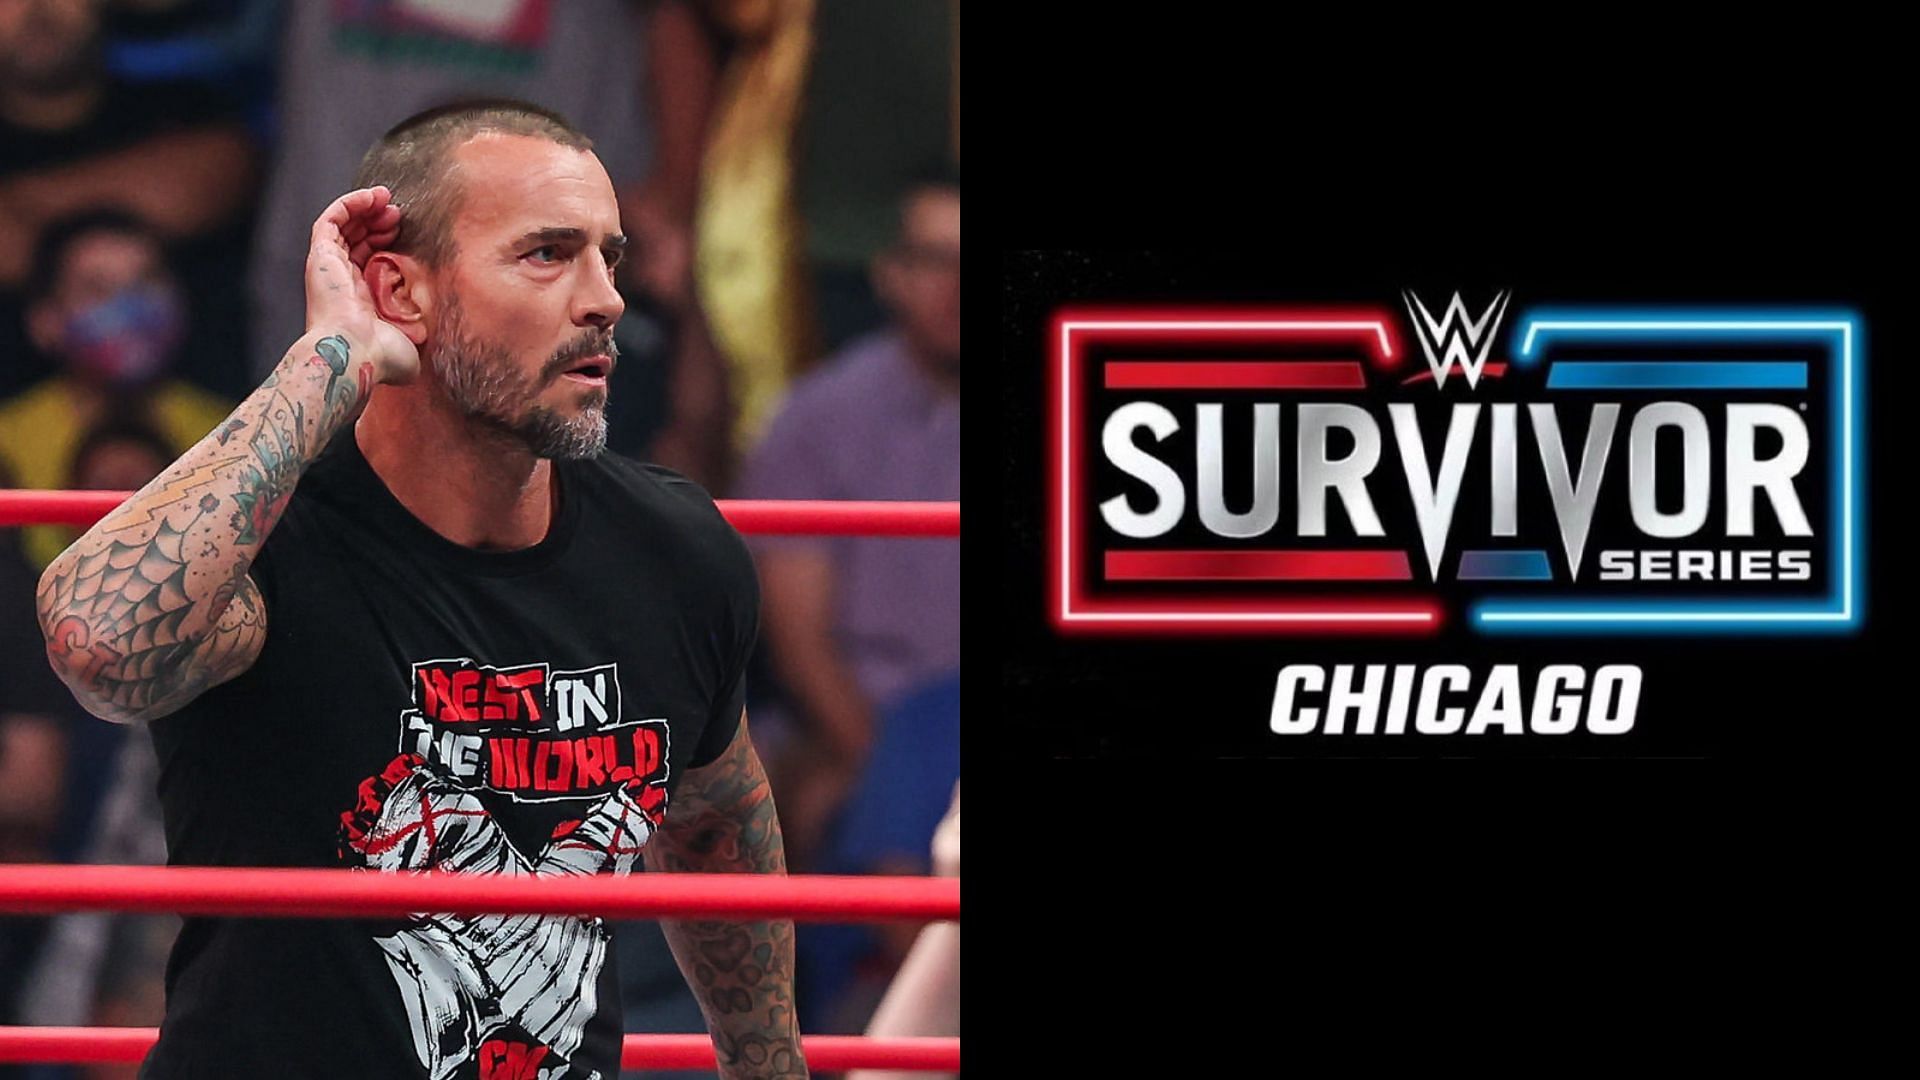 CM Punk was released from AEW and is currently a free agent